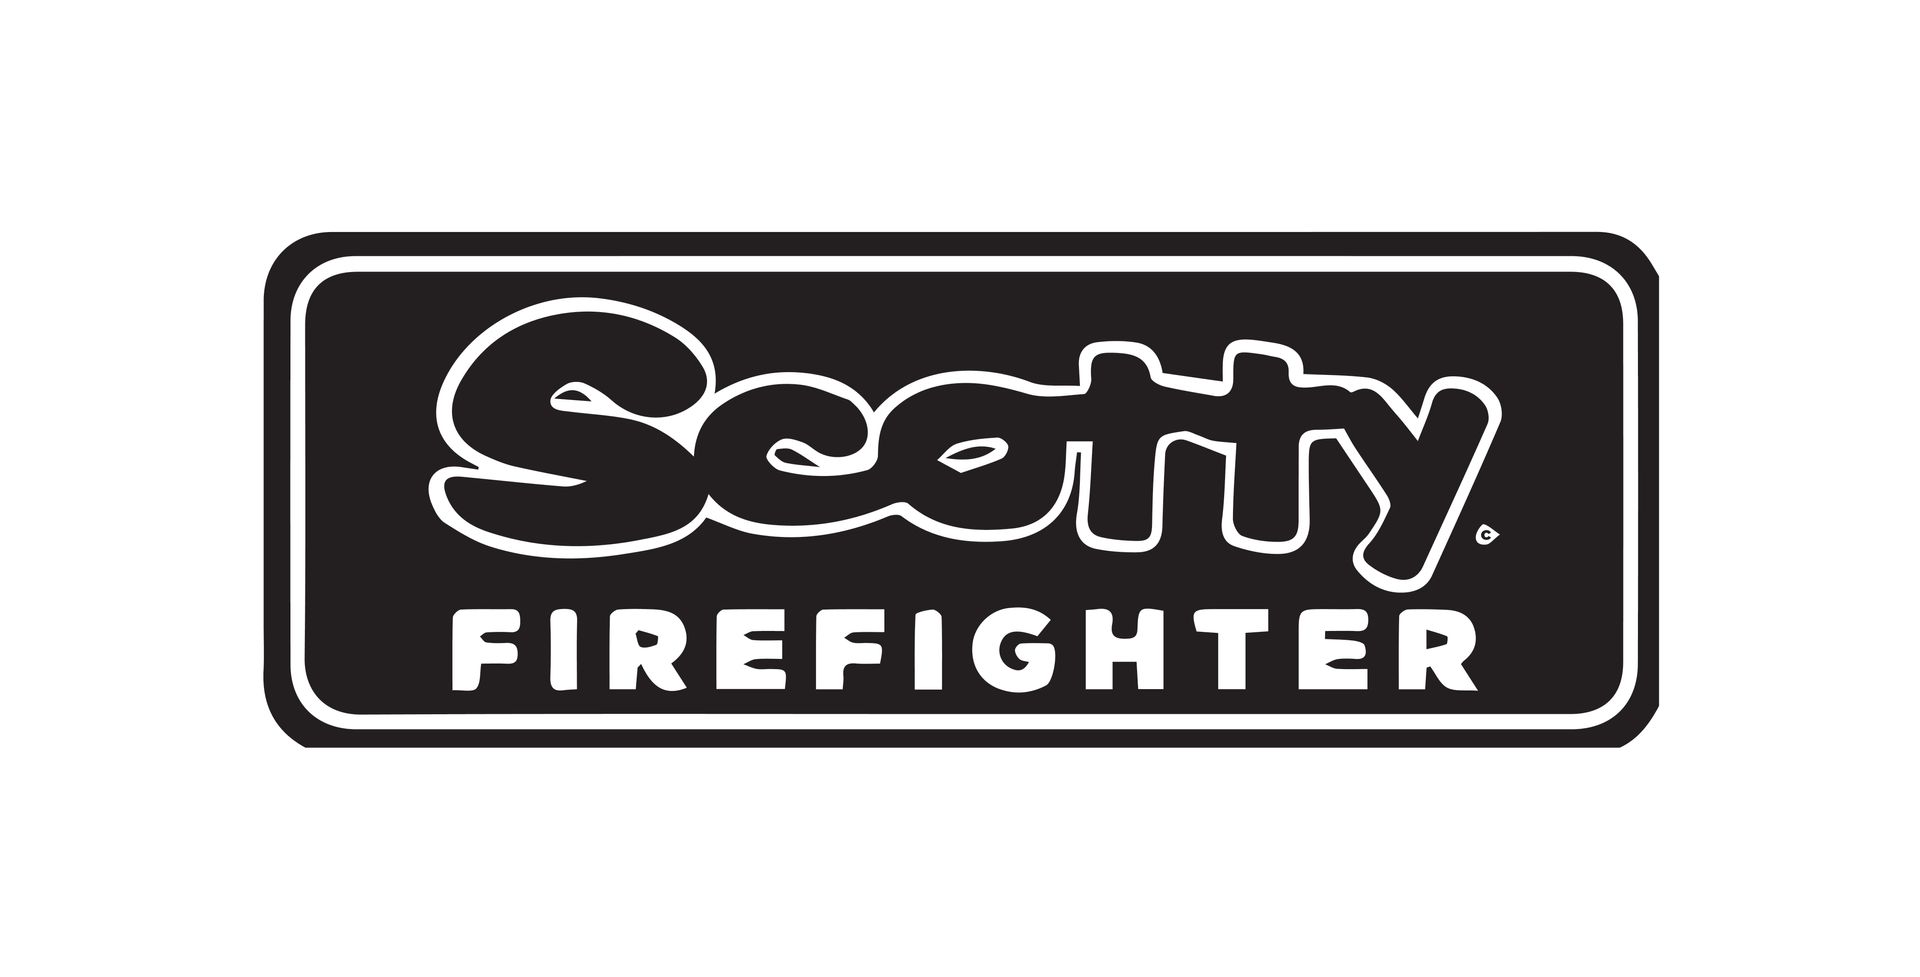 A black and white logo for scotty firefighter on a white background.